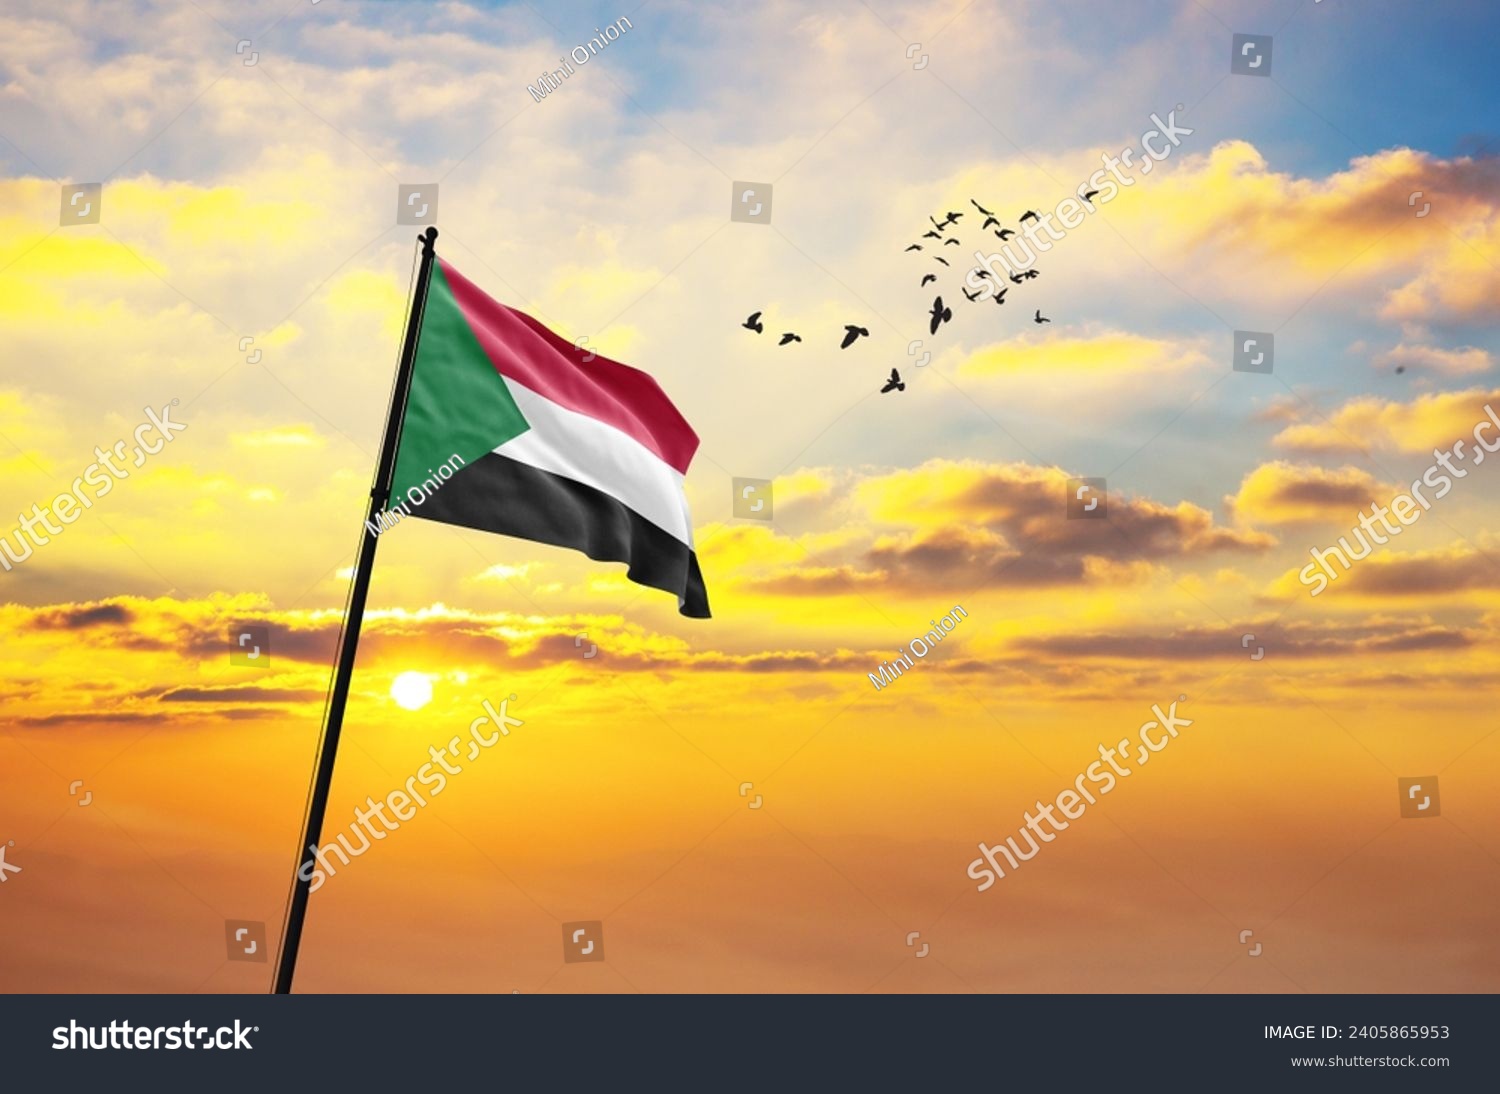 Waving flag of Sudan against the background of a sunset or sunrise. Sudan flag for Independence Day. The symbol of the state on wavy fabric. #2405865953